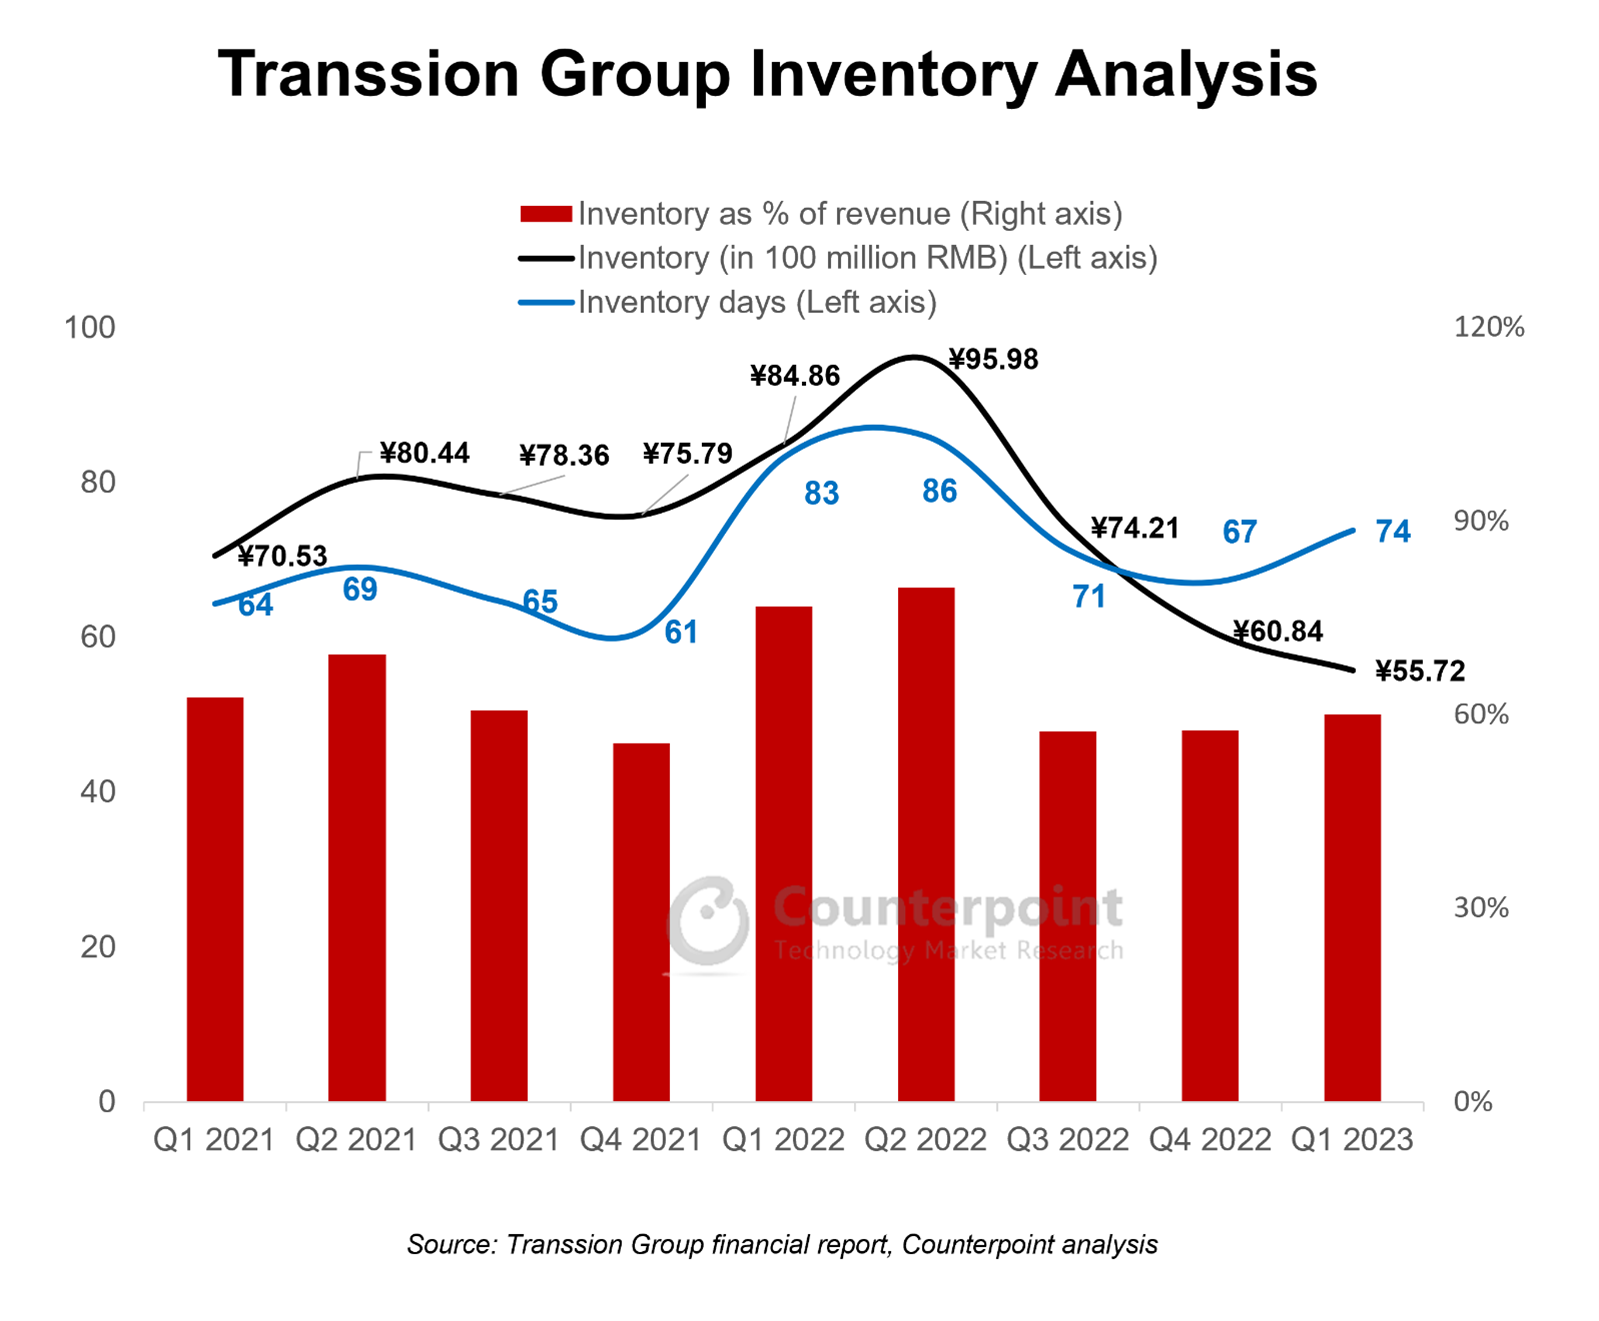 A chart showing Transsion Group Inventory Analysis